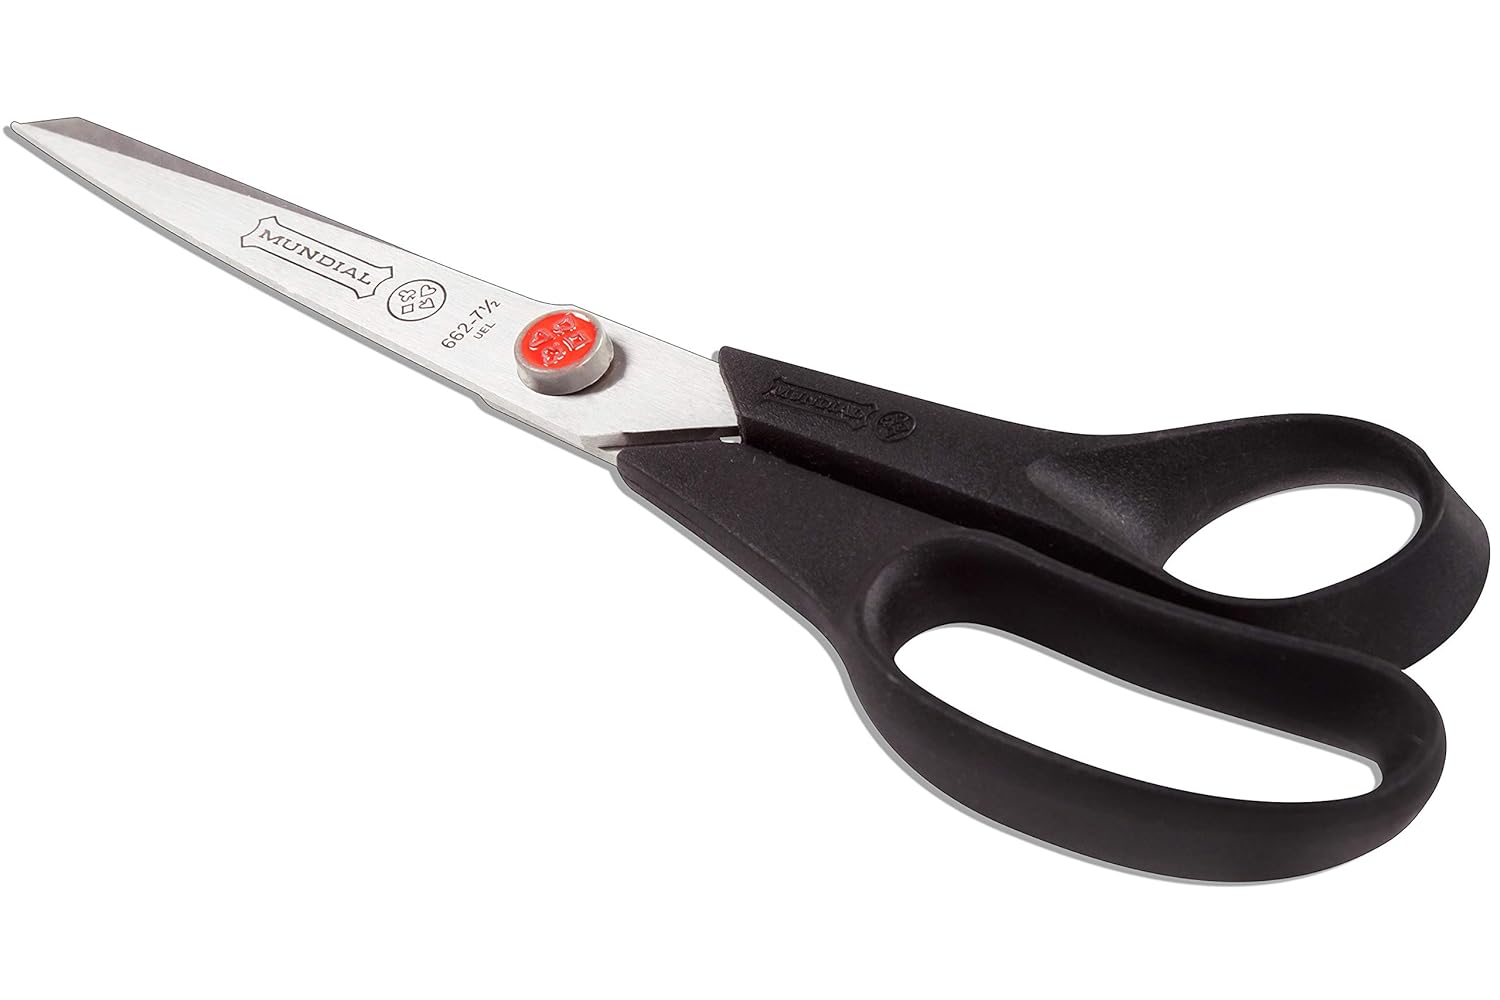 7 1/2" --- Straight Trimmers - Red Dot - Sewing Dressmaker Scissors, Black Color by Mundial®